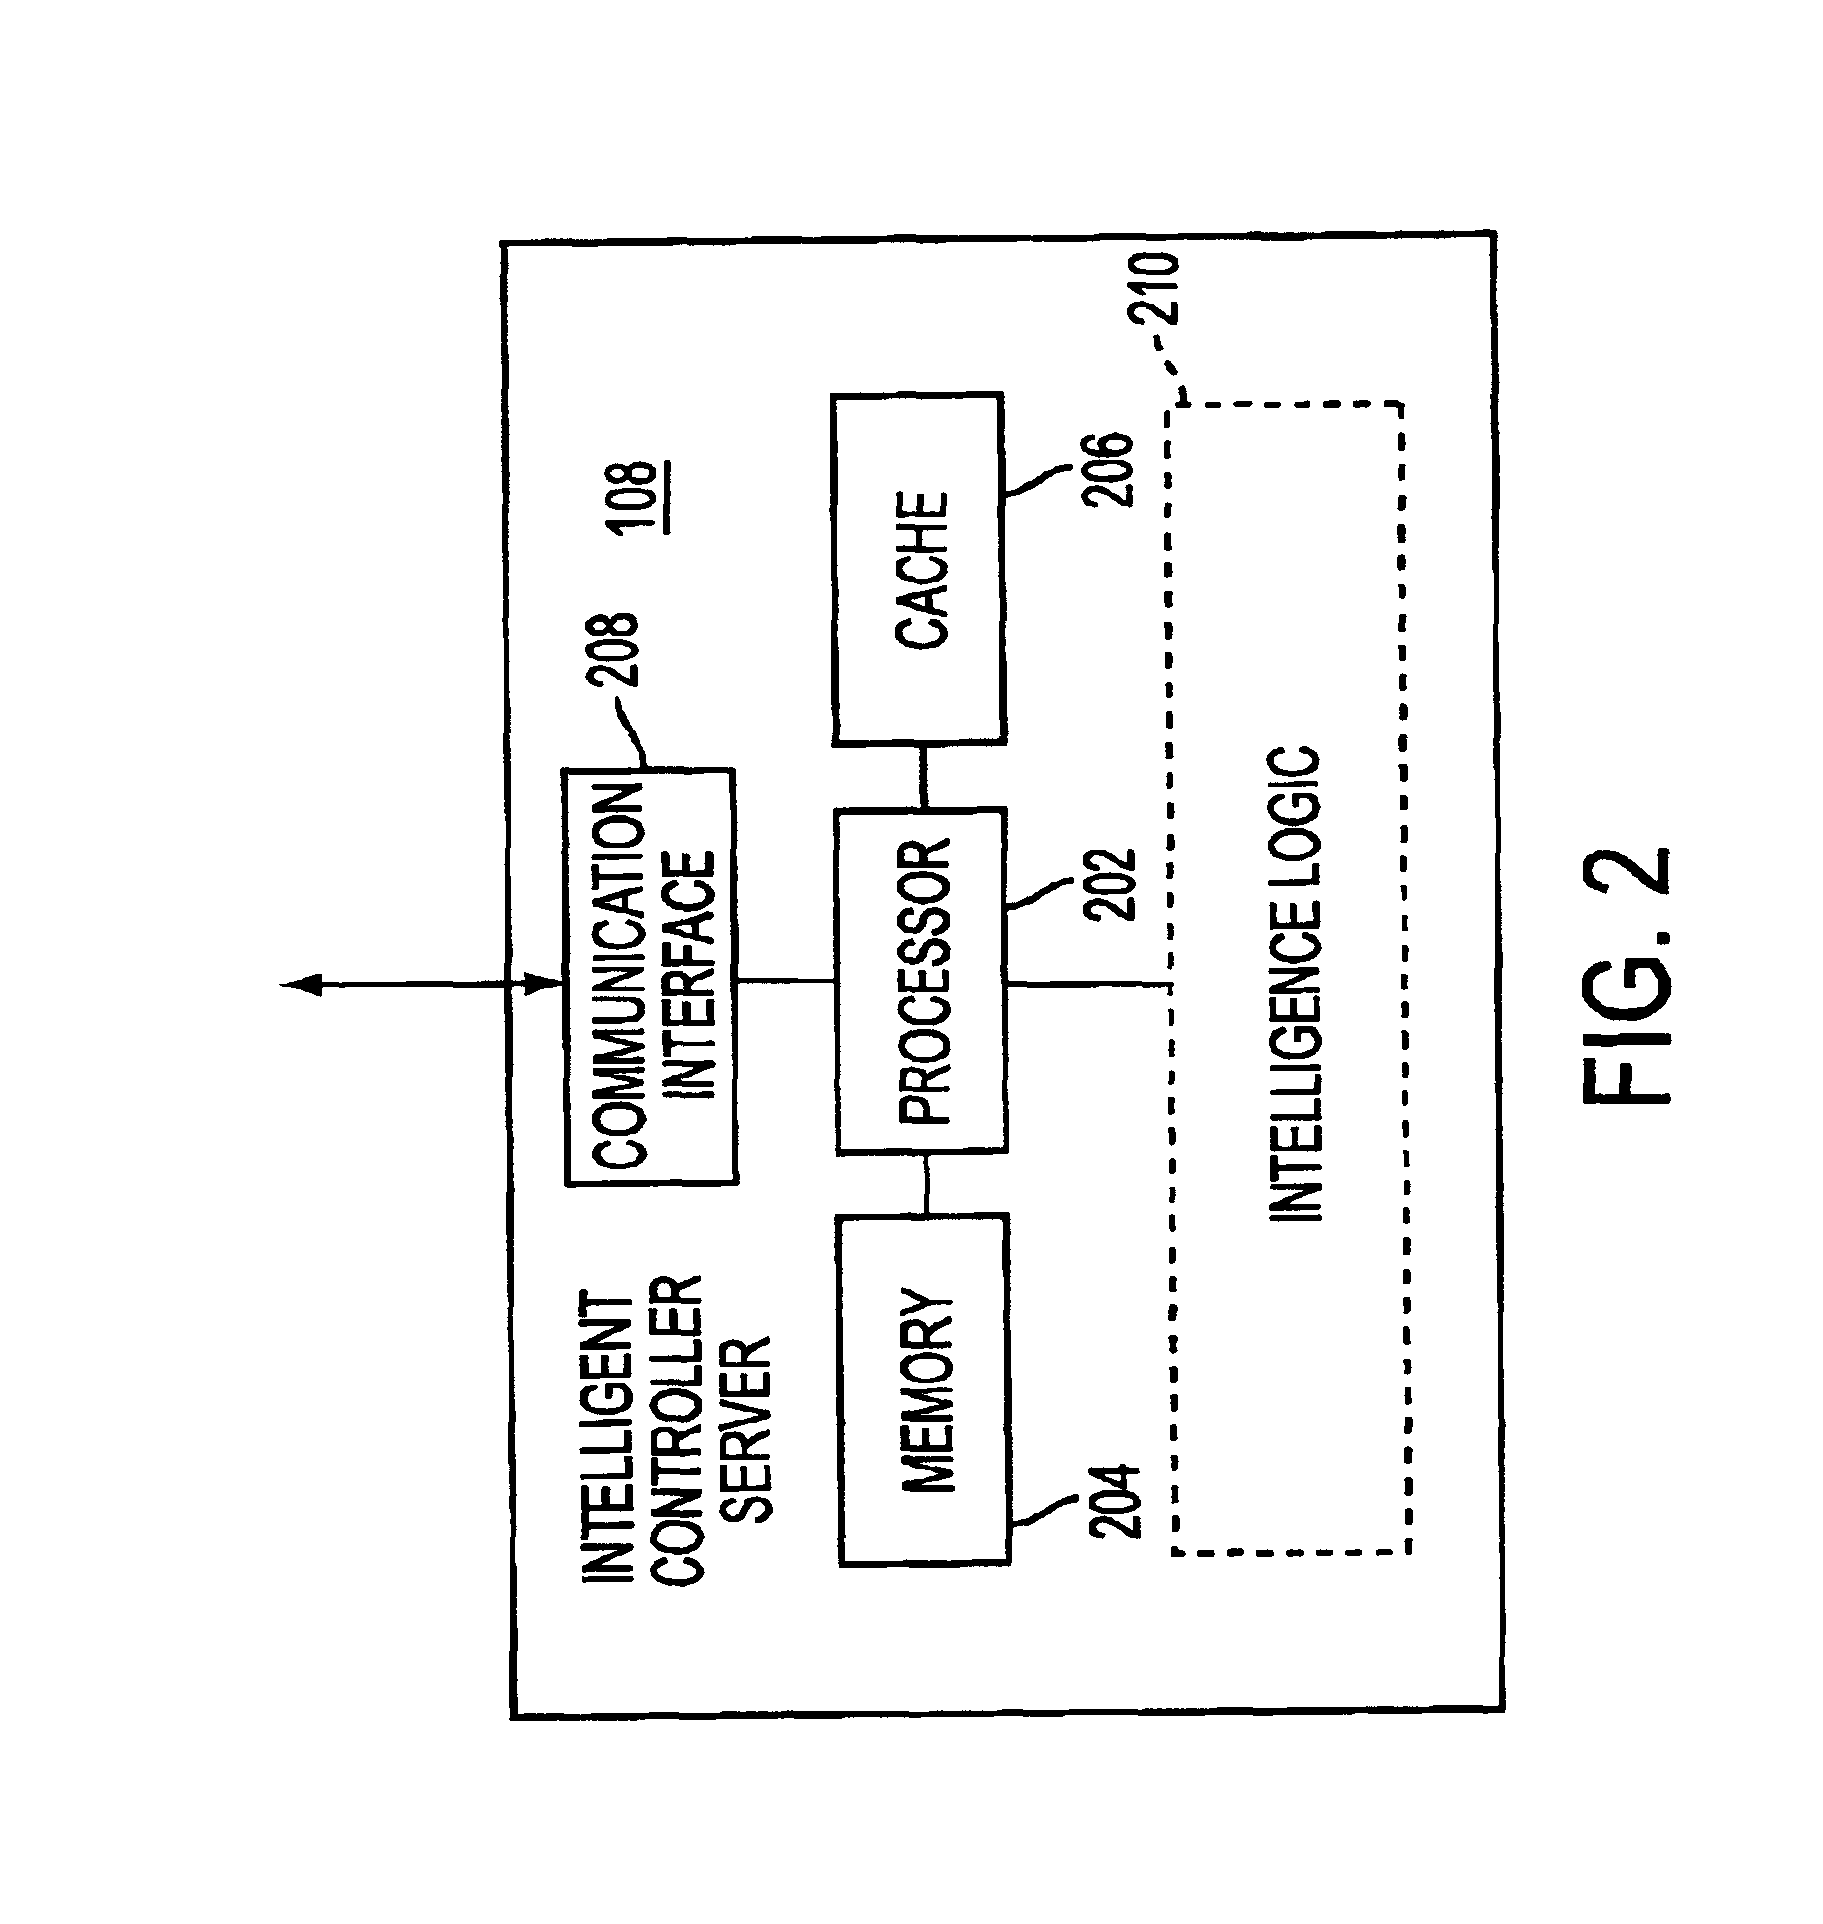 System and method for providing access to resources using a fabric switch